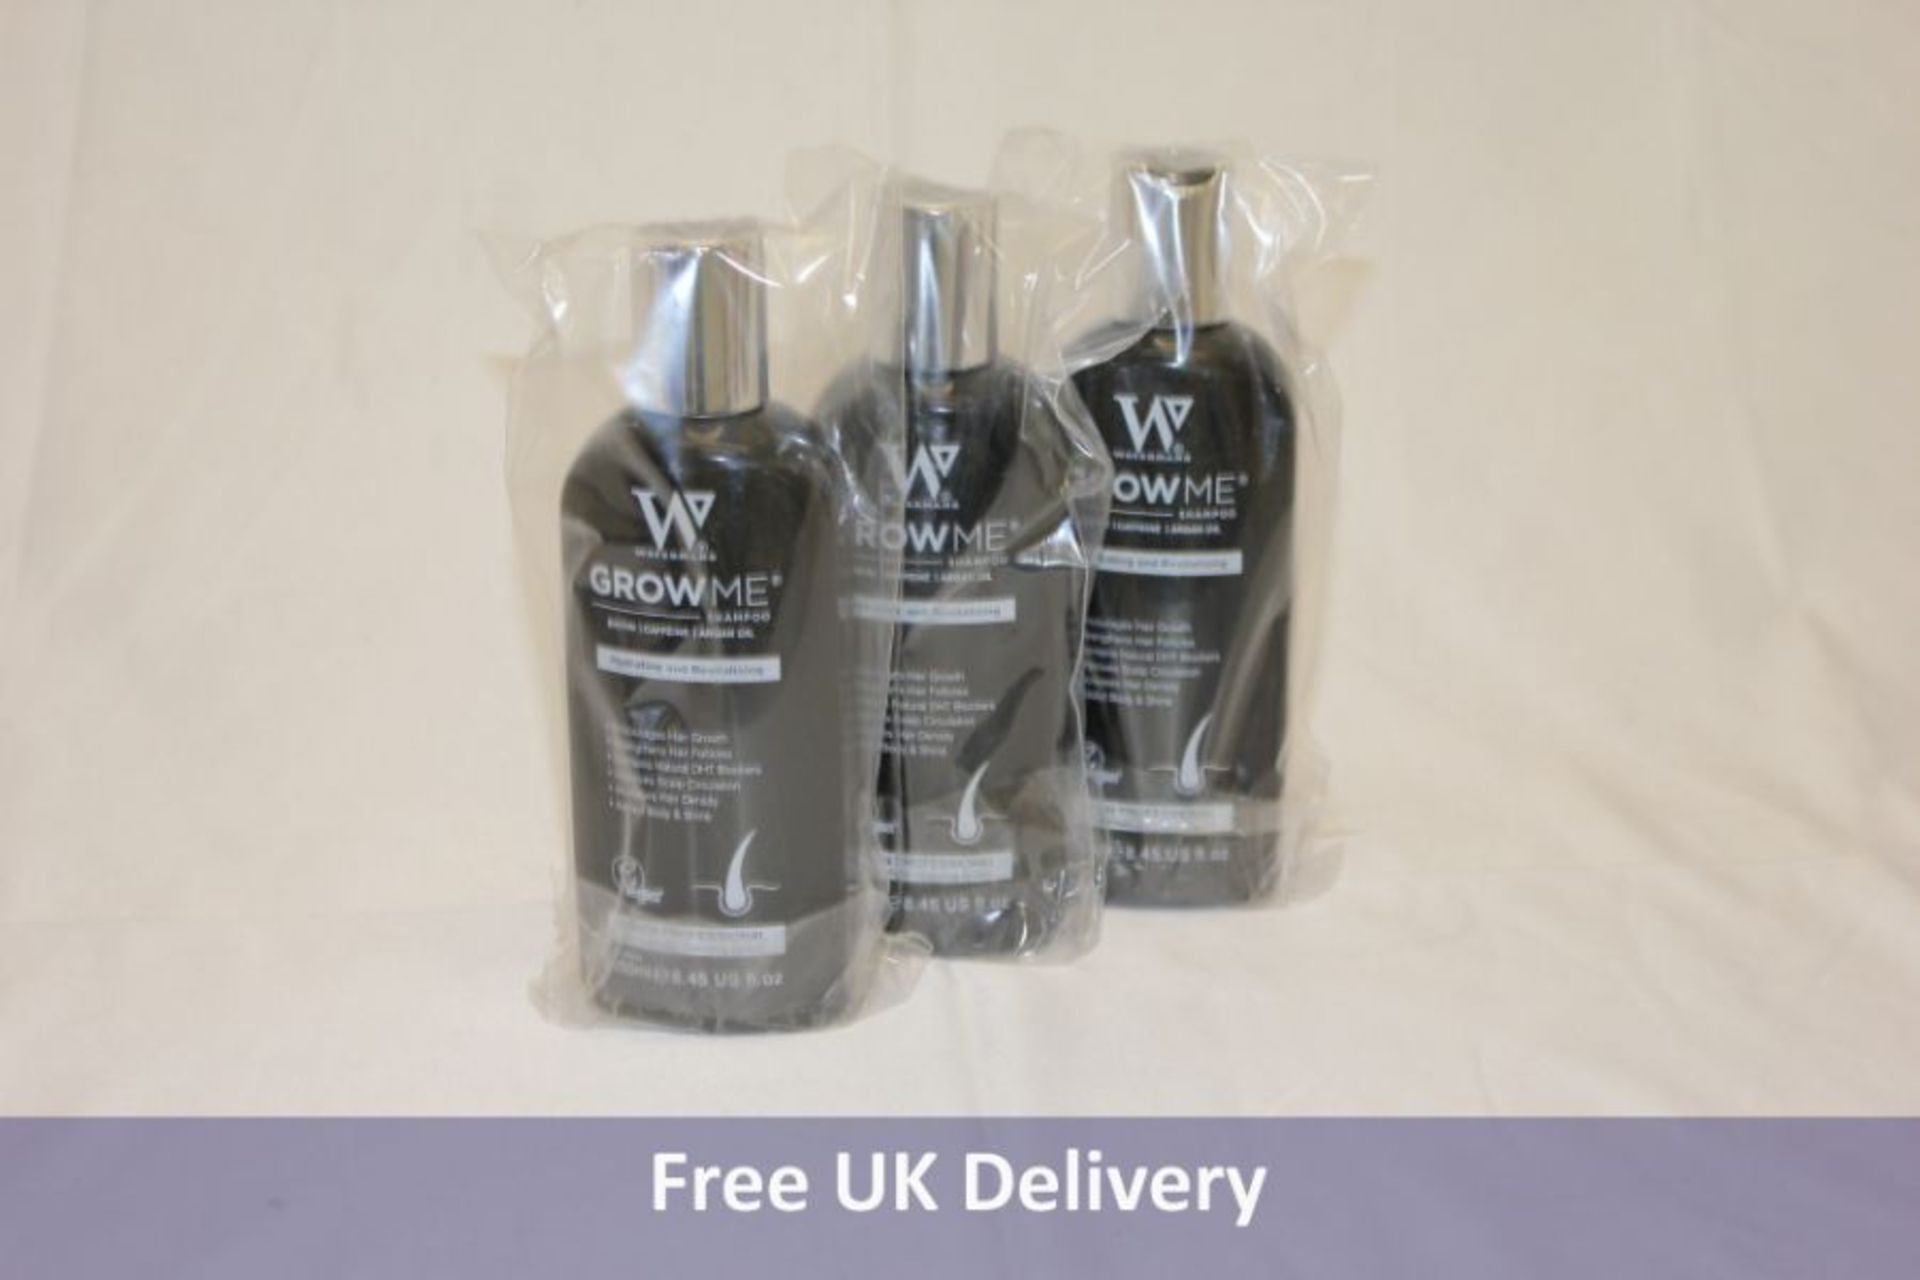 Twenty-five Hair Growth Shampoo and Conditioner by Watermans UK Male and Female Hair Loss Products,